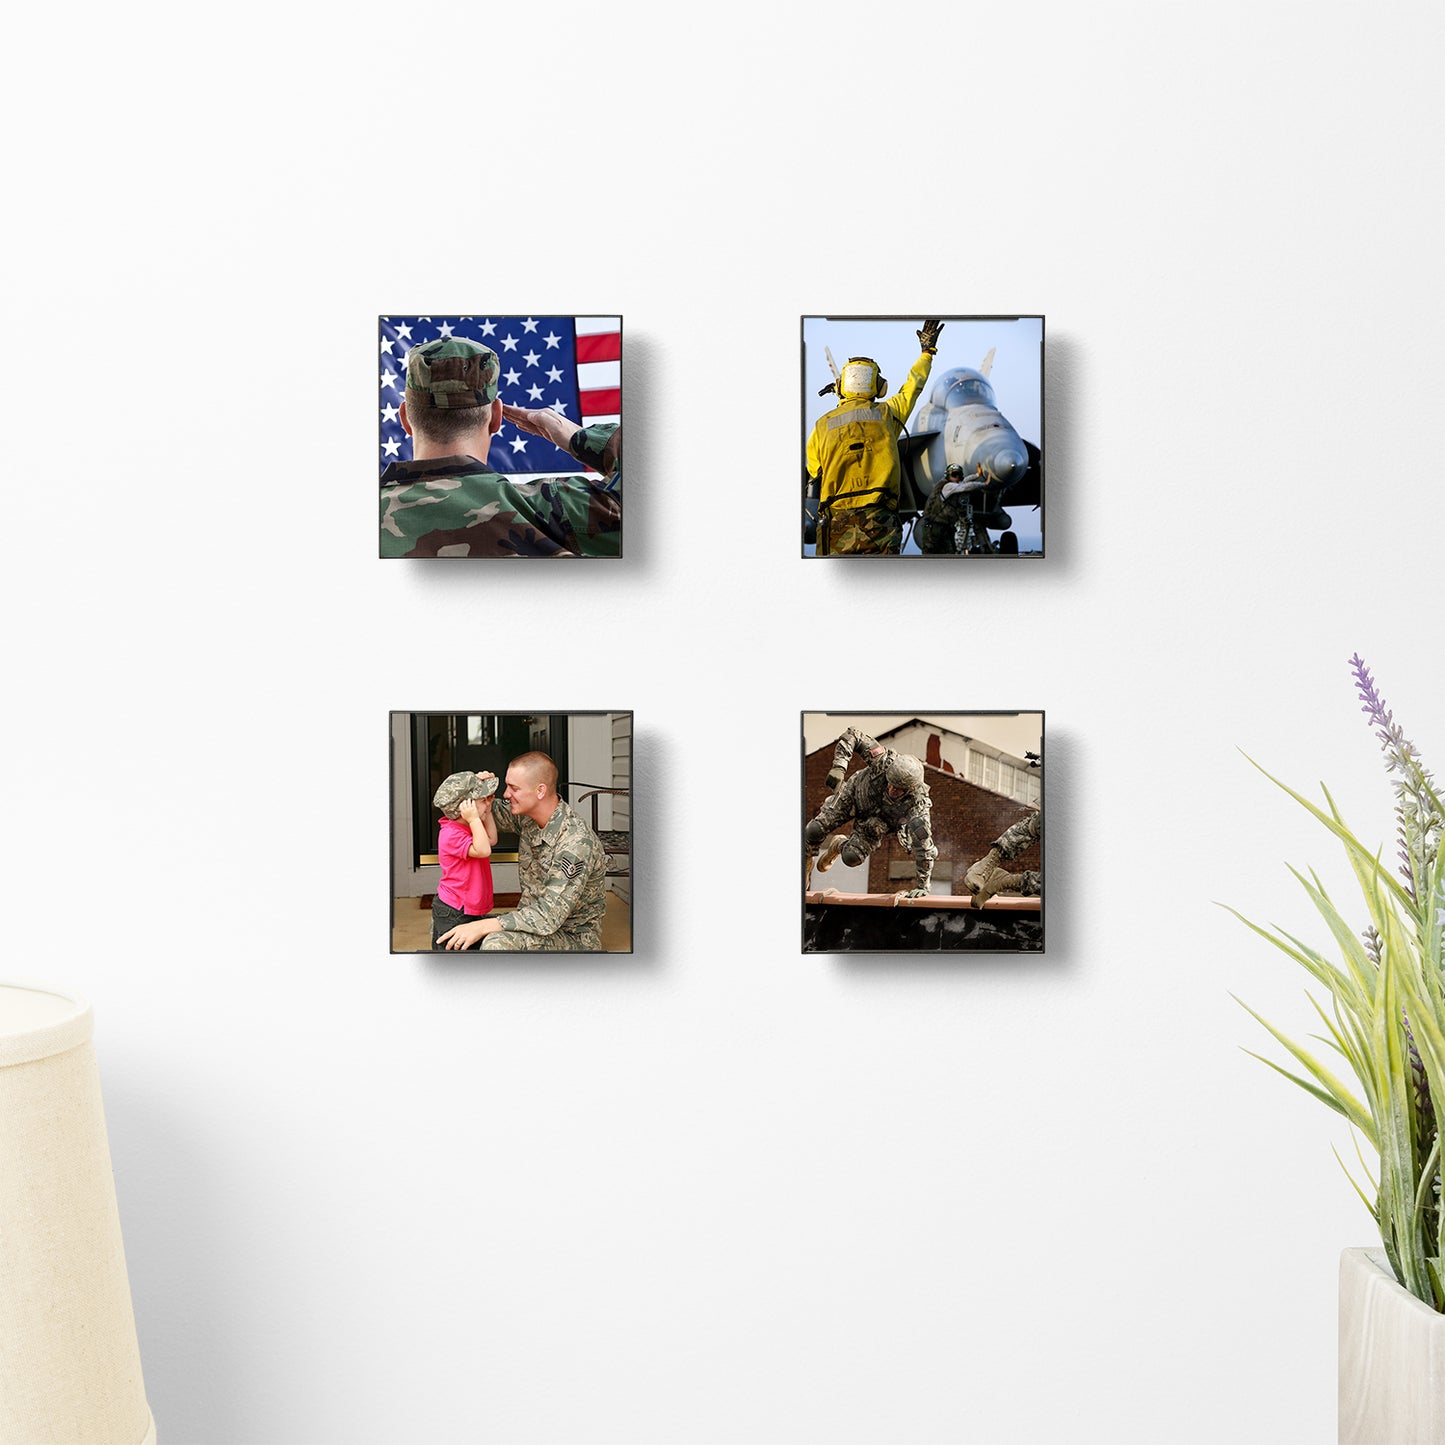 Realnique Black 4x4 Picture Frames [4 pack] Patented wall-mounted socket enables quick frame changing, rotating, and floating off-wall appearance. Front loading square photo frames.